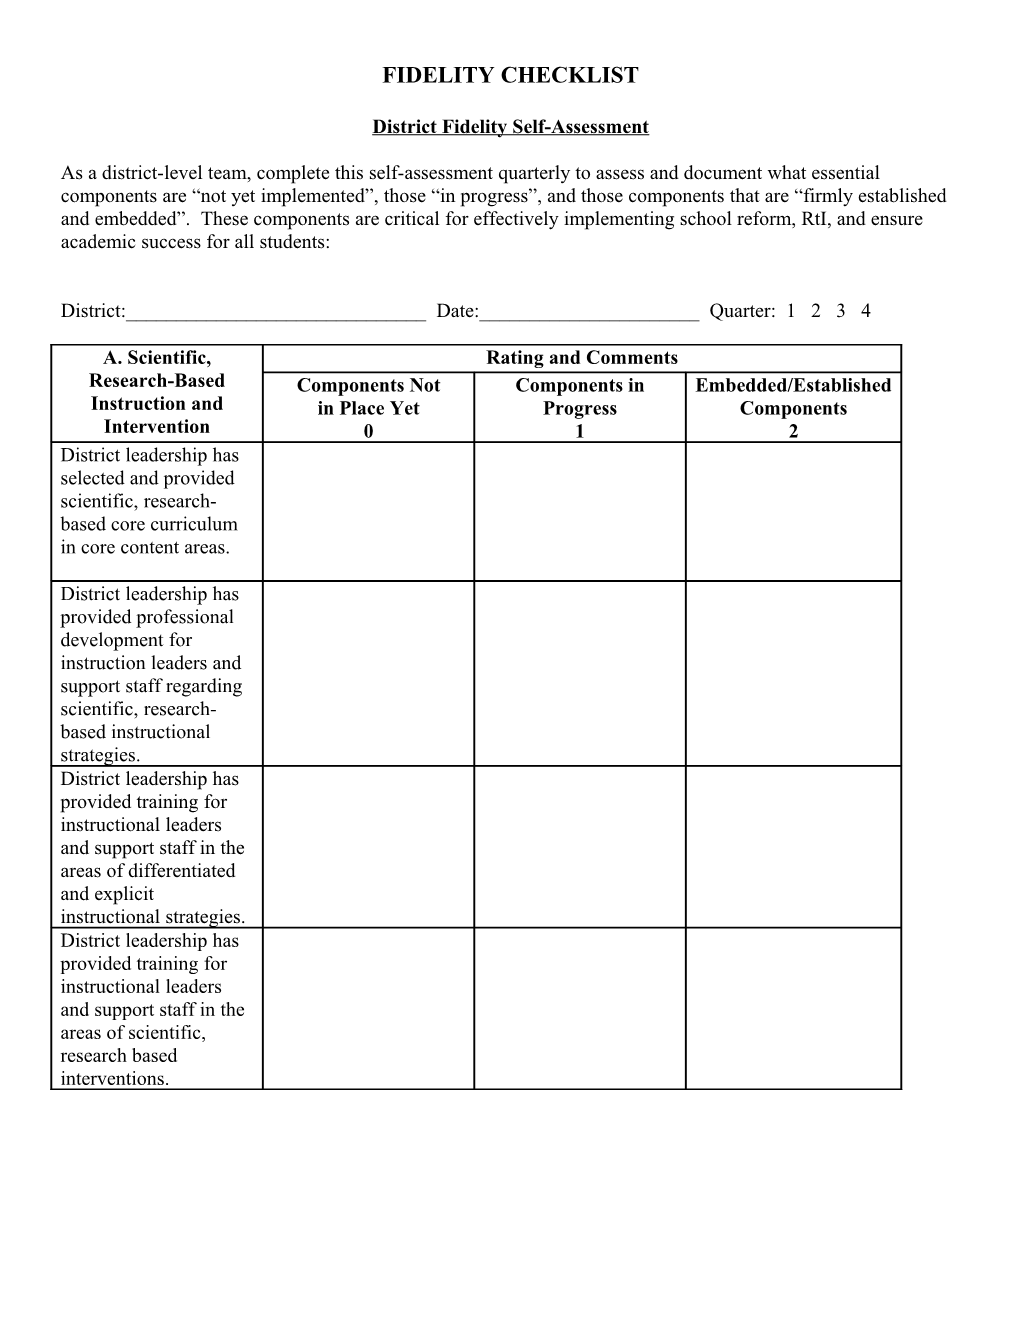 District Fidelity Self-Assessment